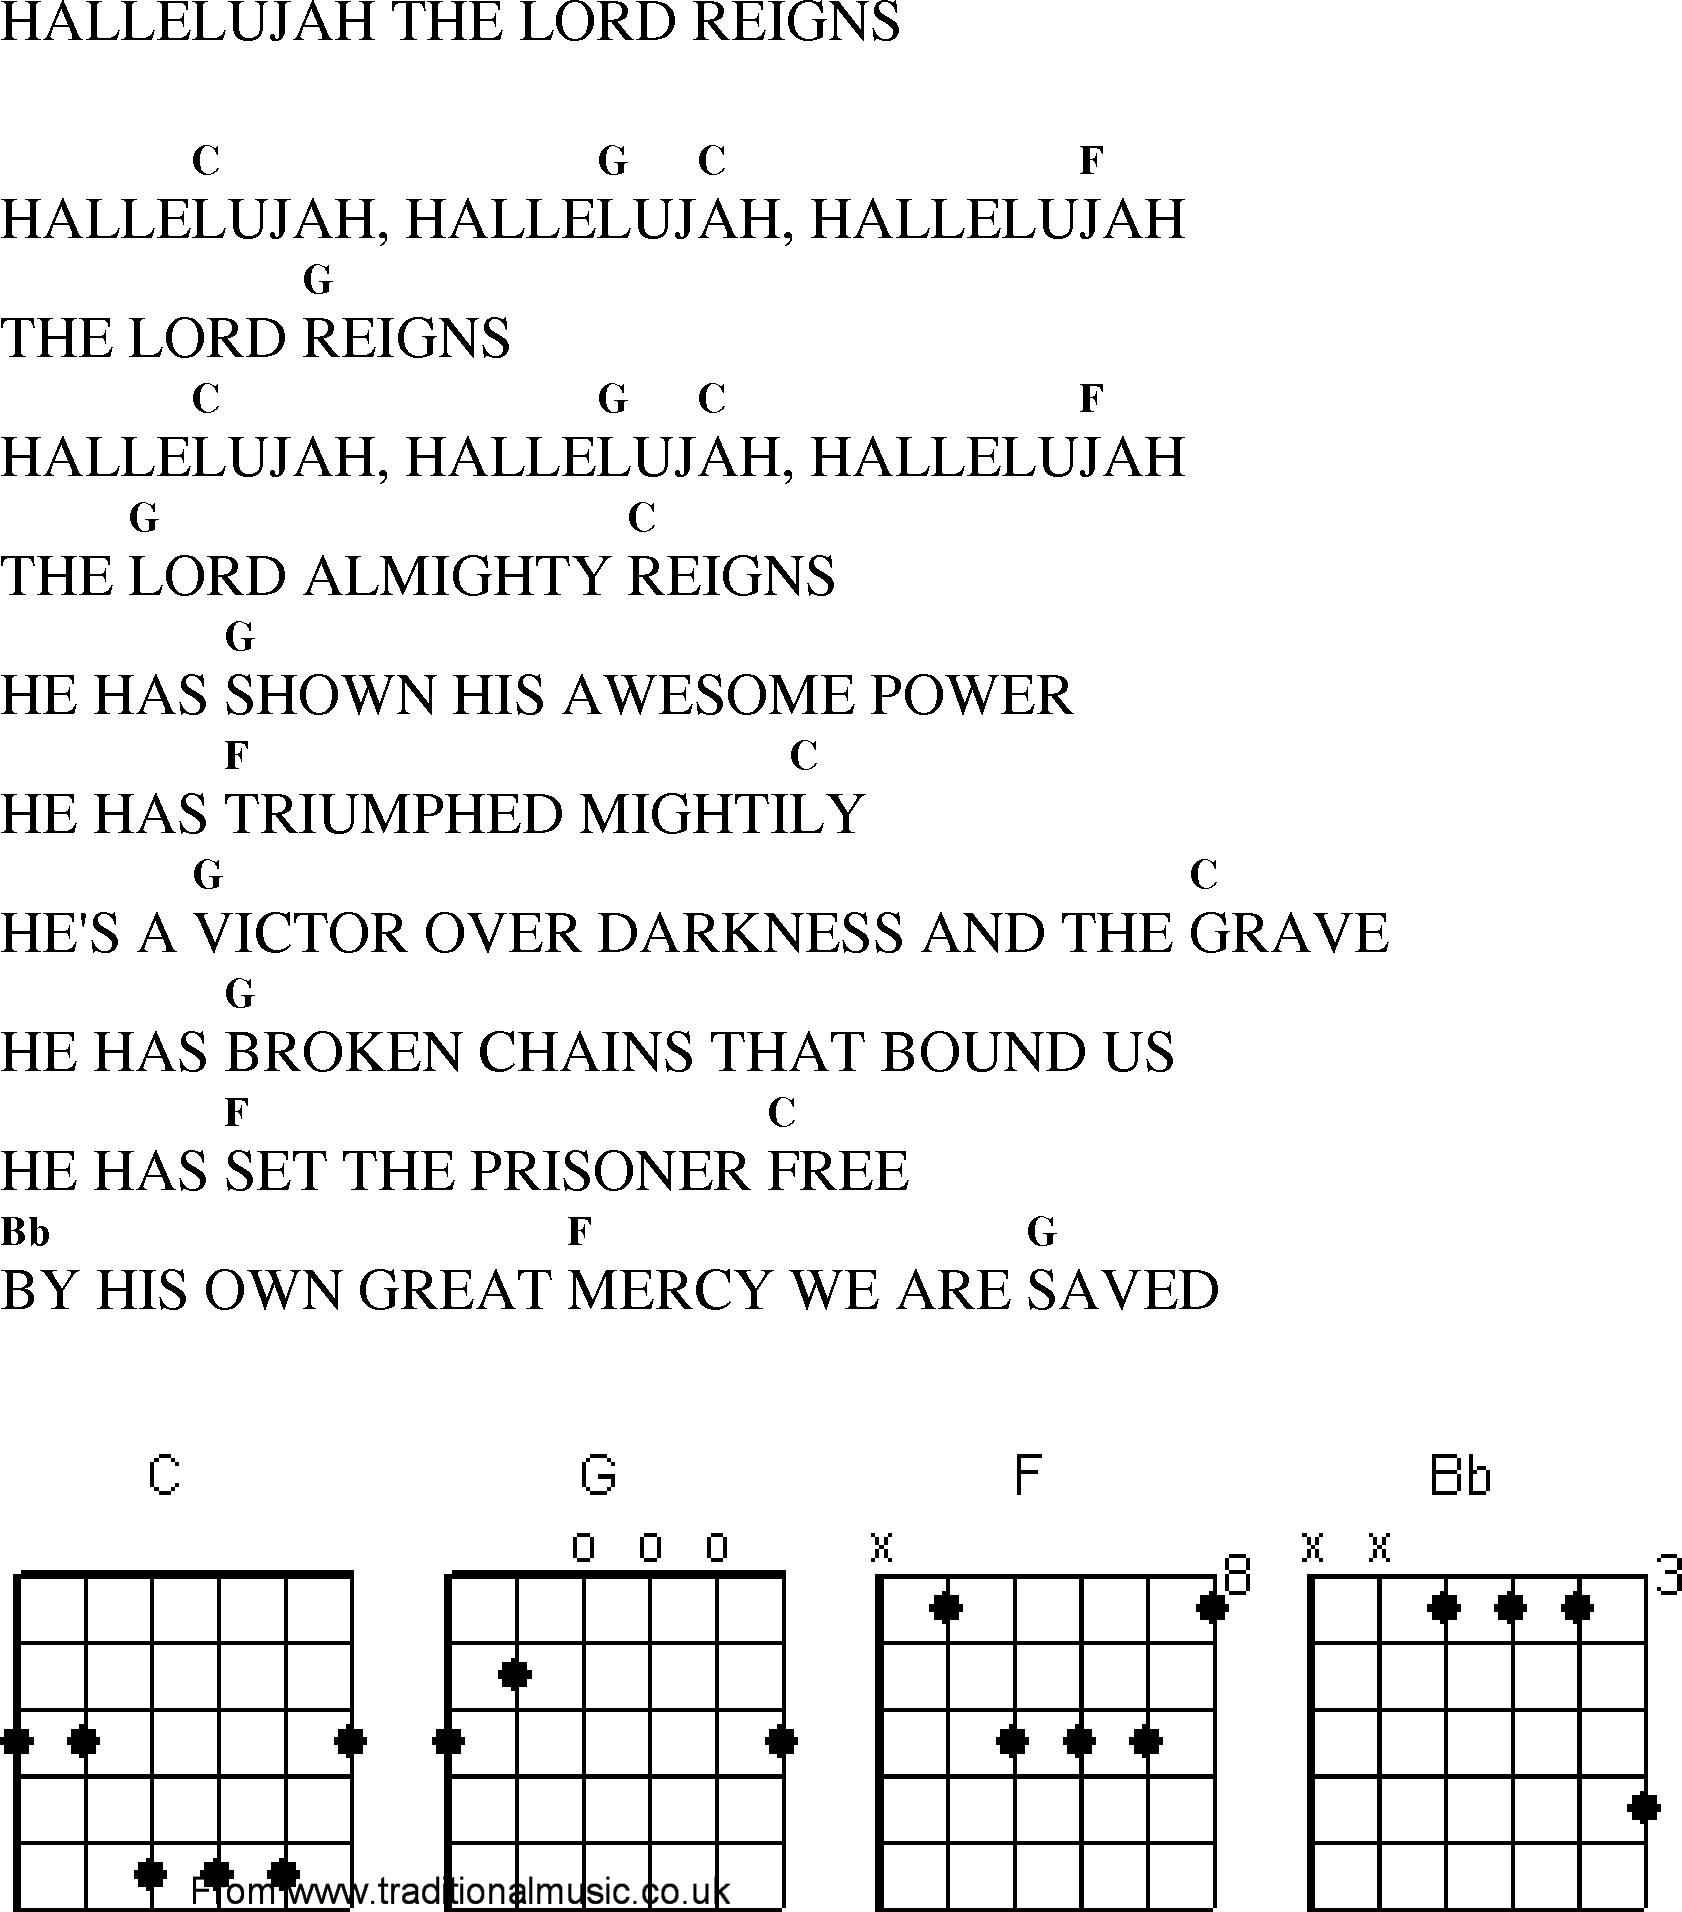 Gospel Song: hallelujah_the_lord_reigns, lyrics and chords.